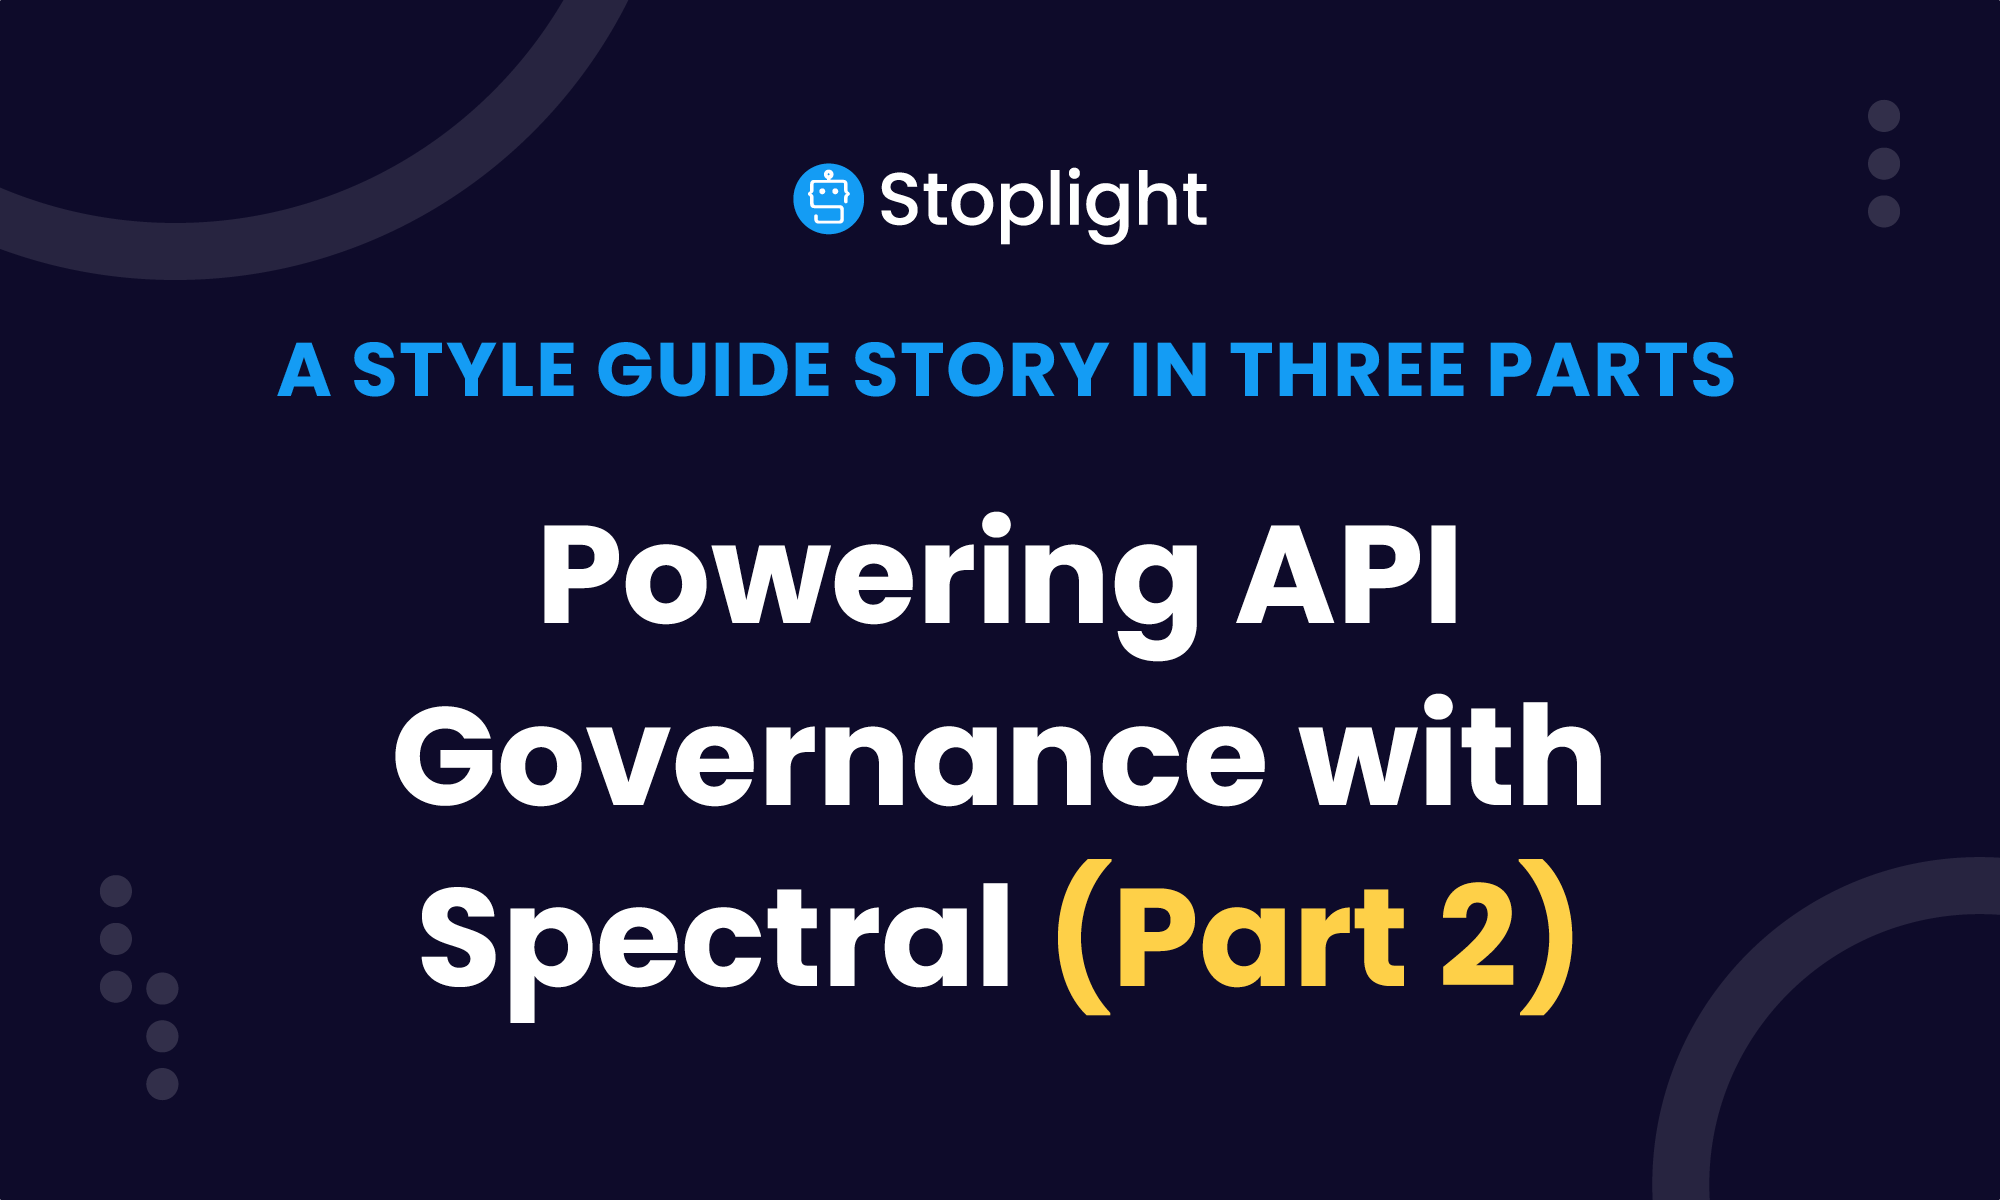 Powering API Governance with Spectral: Part Two